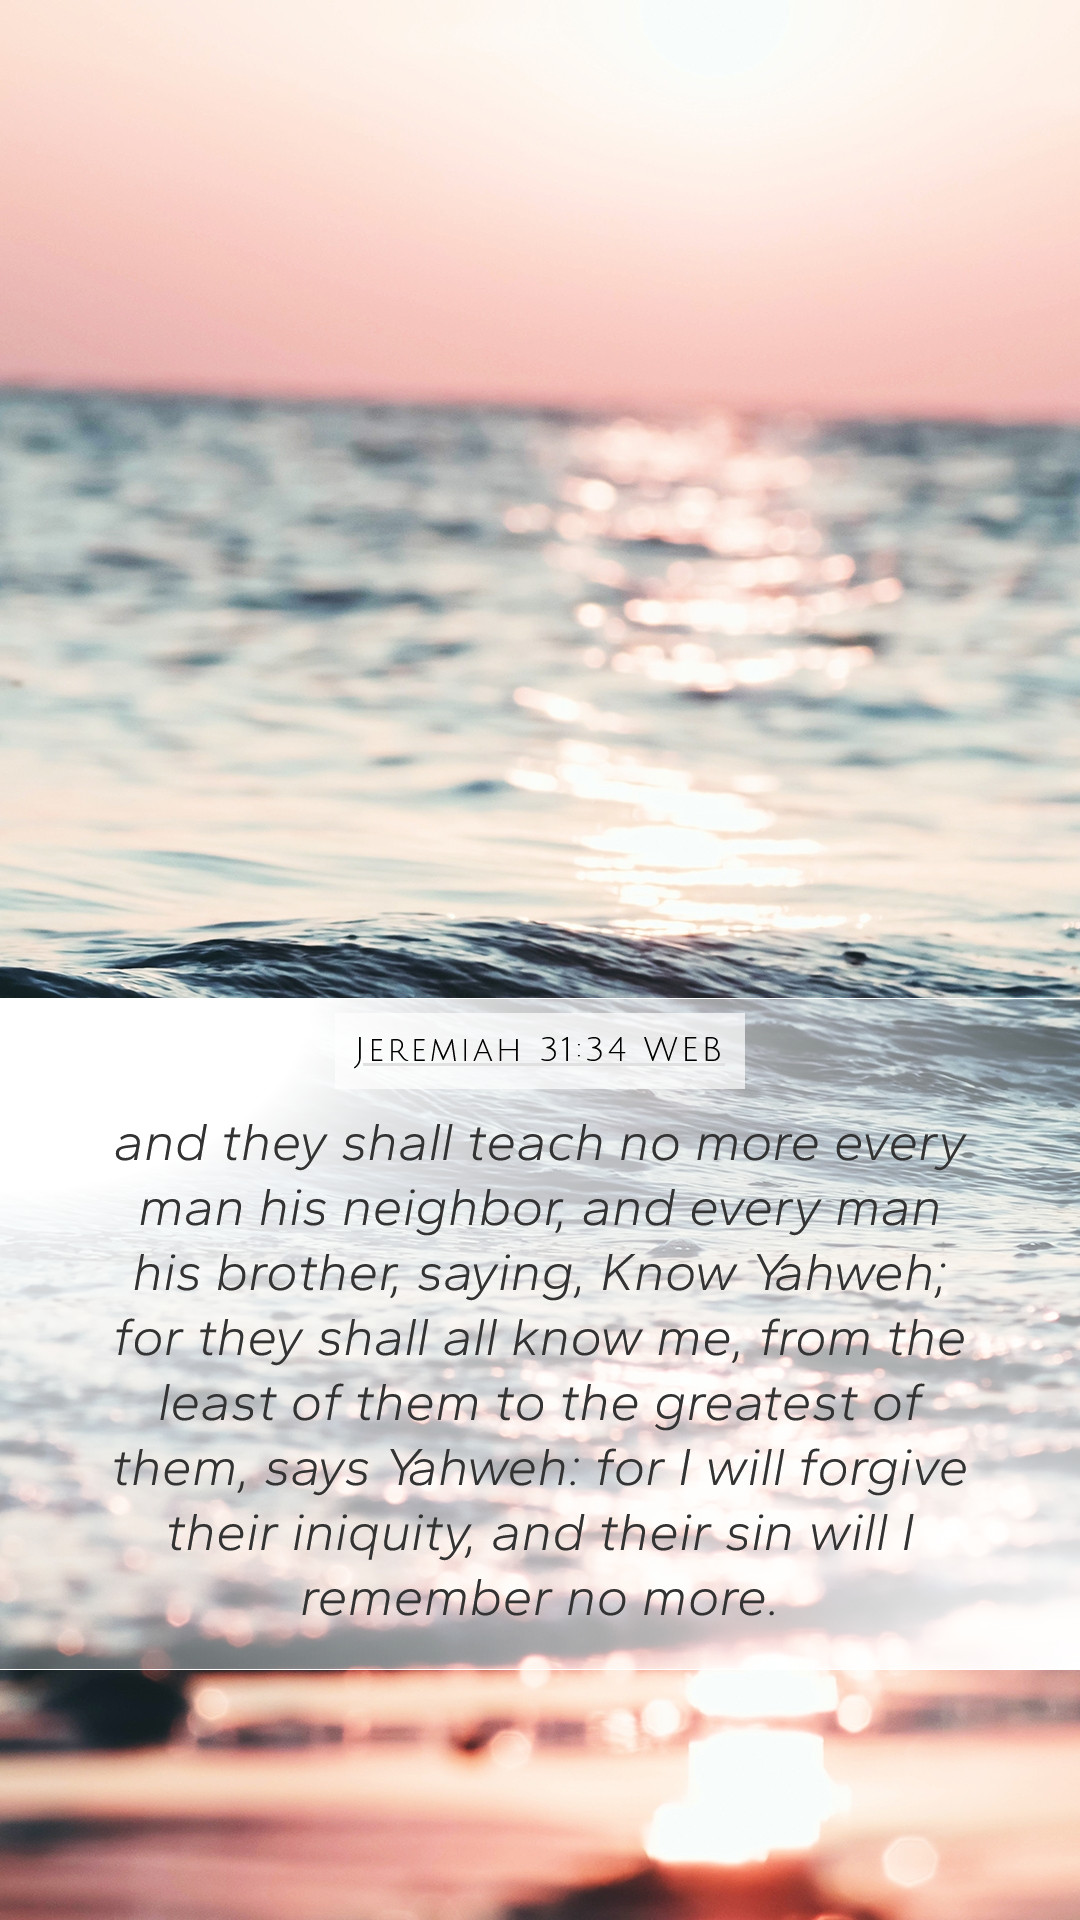 Jeremiah 31:34 WEB Mobile Phone Wallpaper they shall teach no more every man his